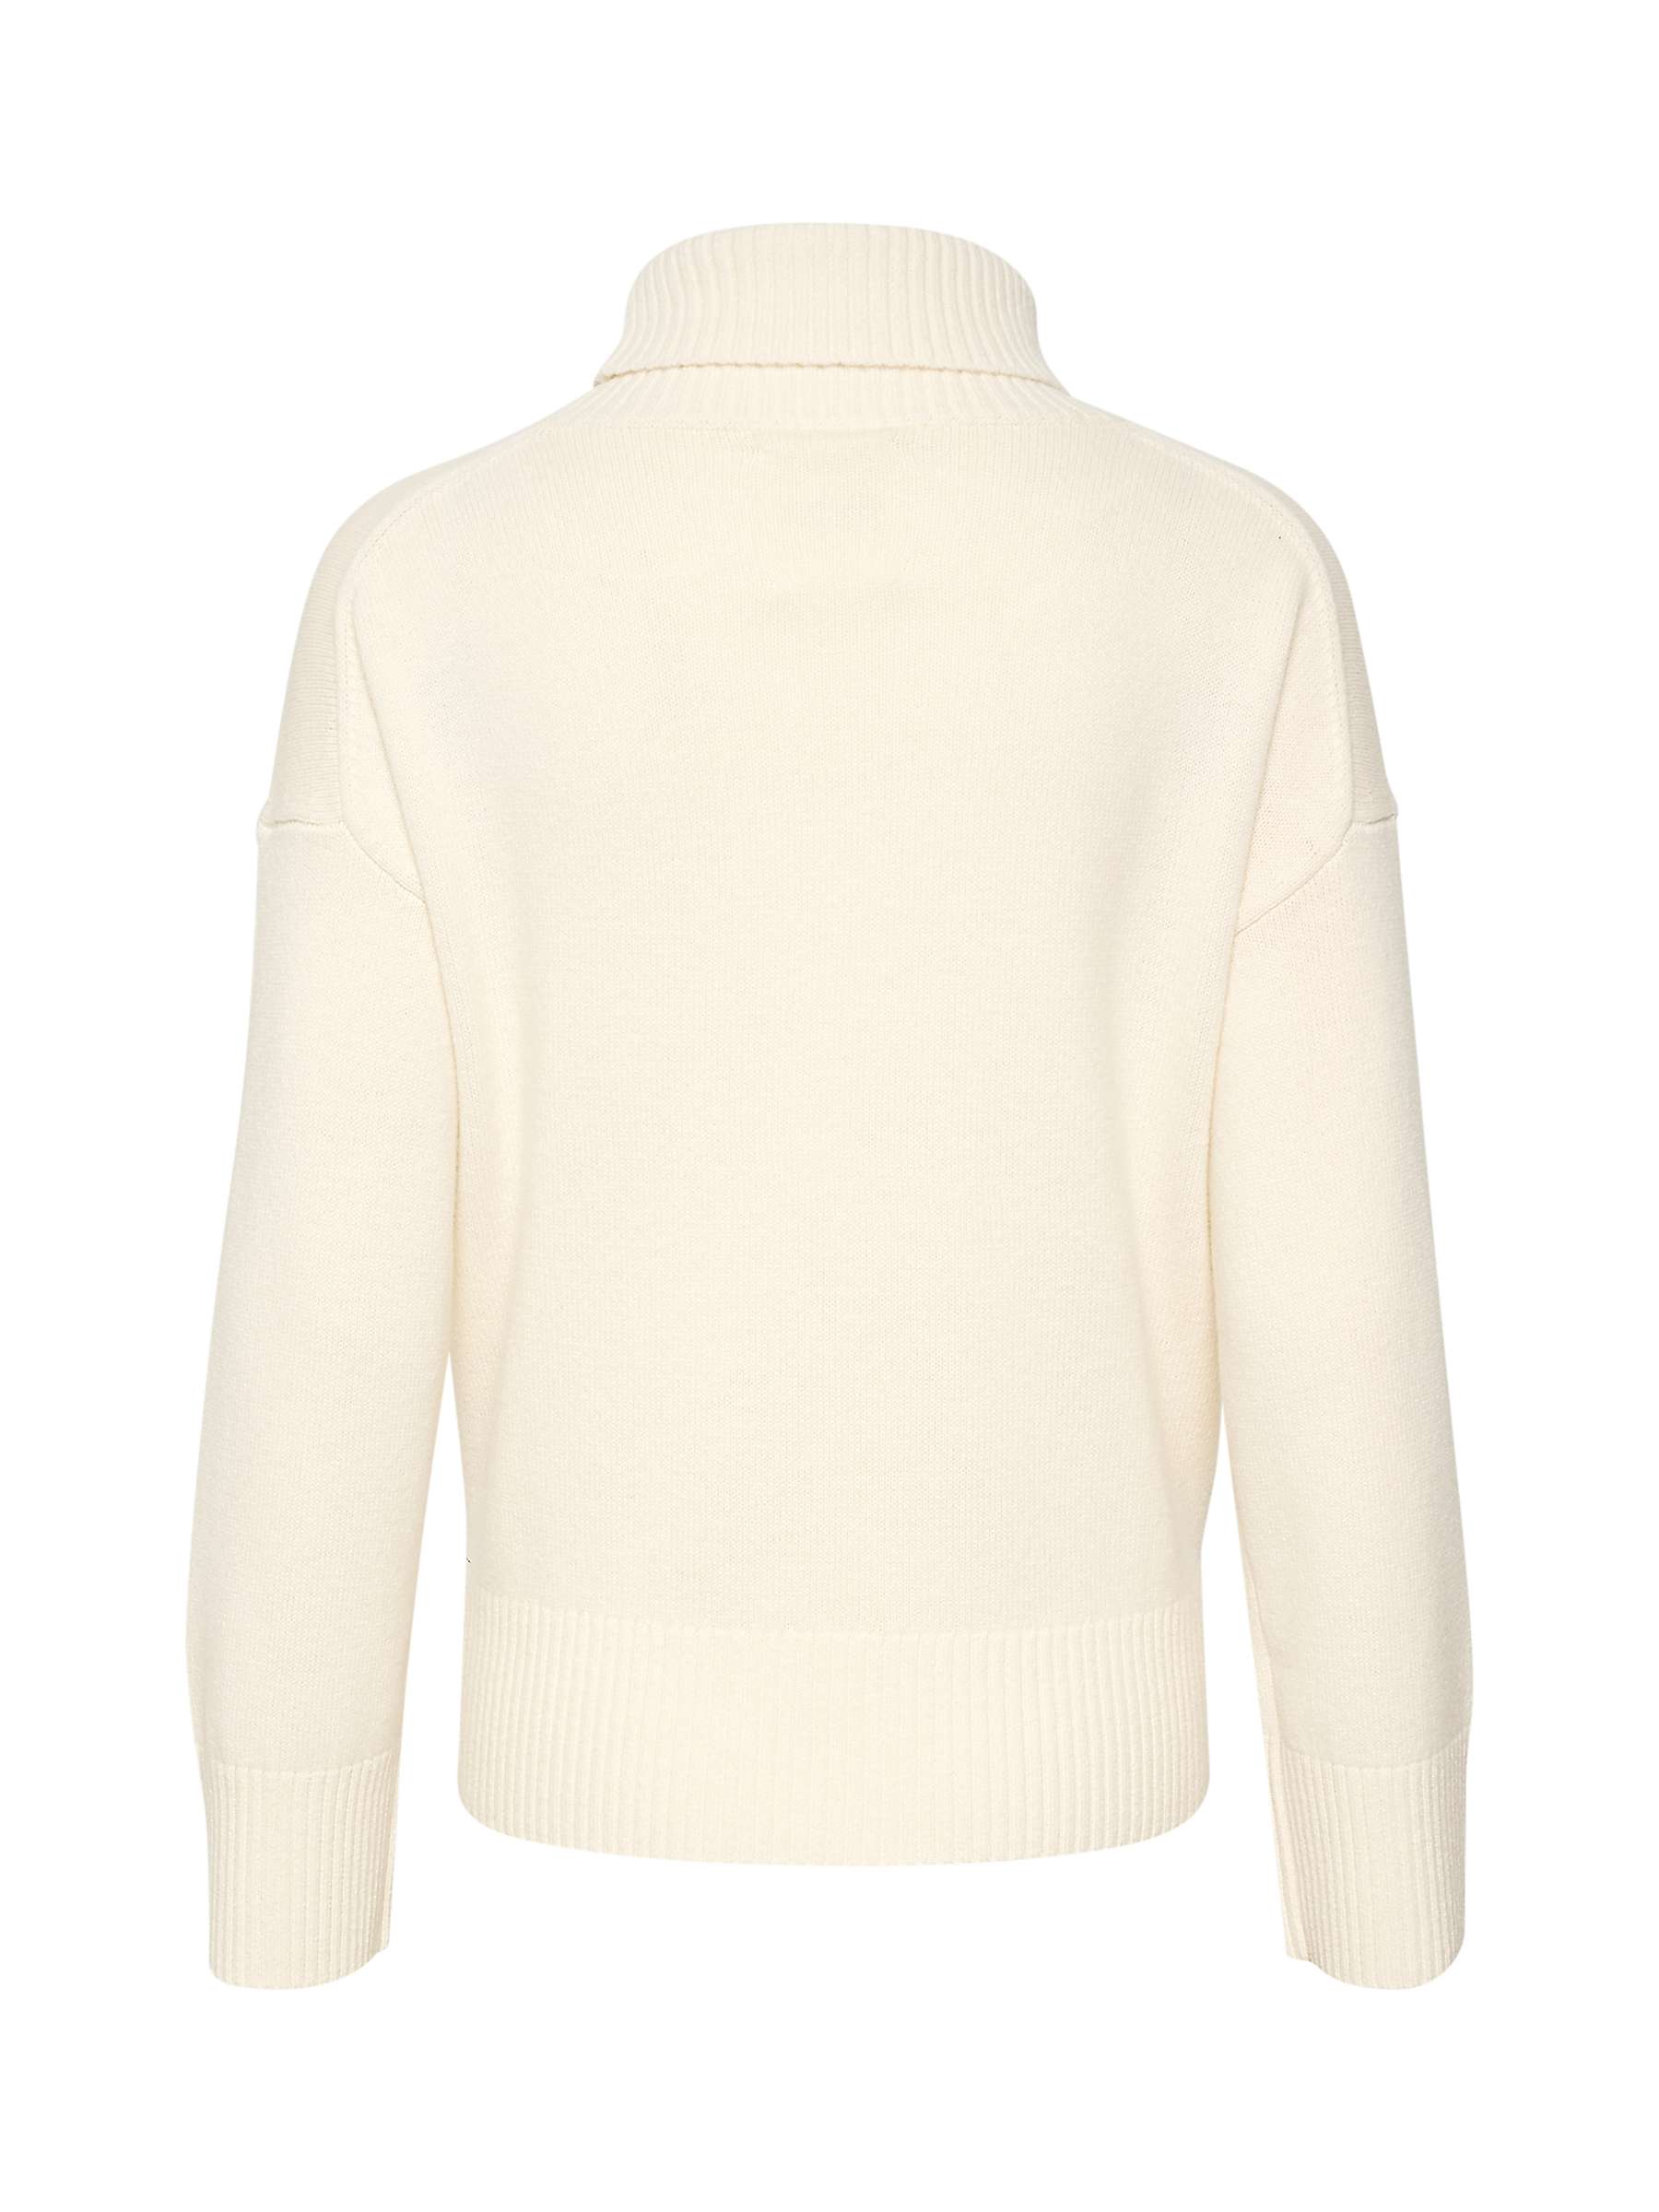 Buy Part Two Corina Roll Neck Wool Jumper Online at johnlewis.com